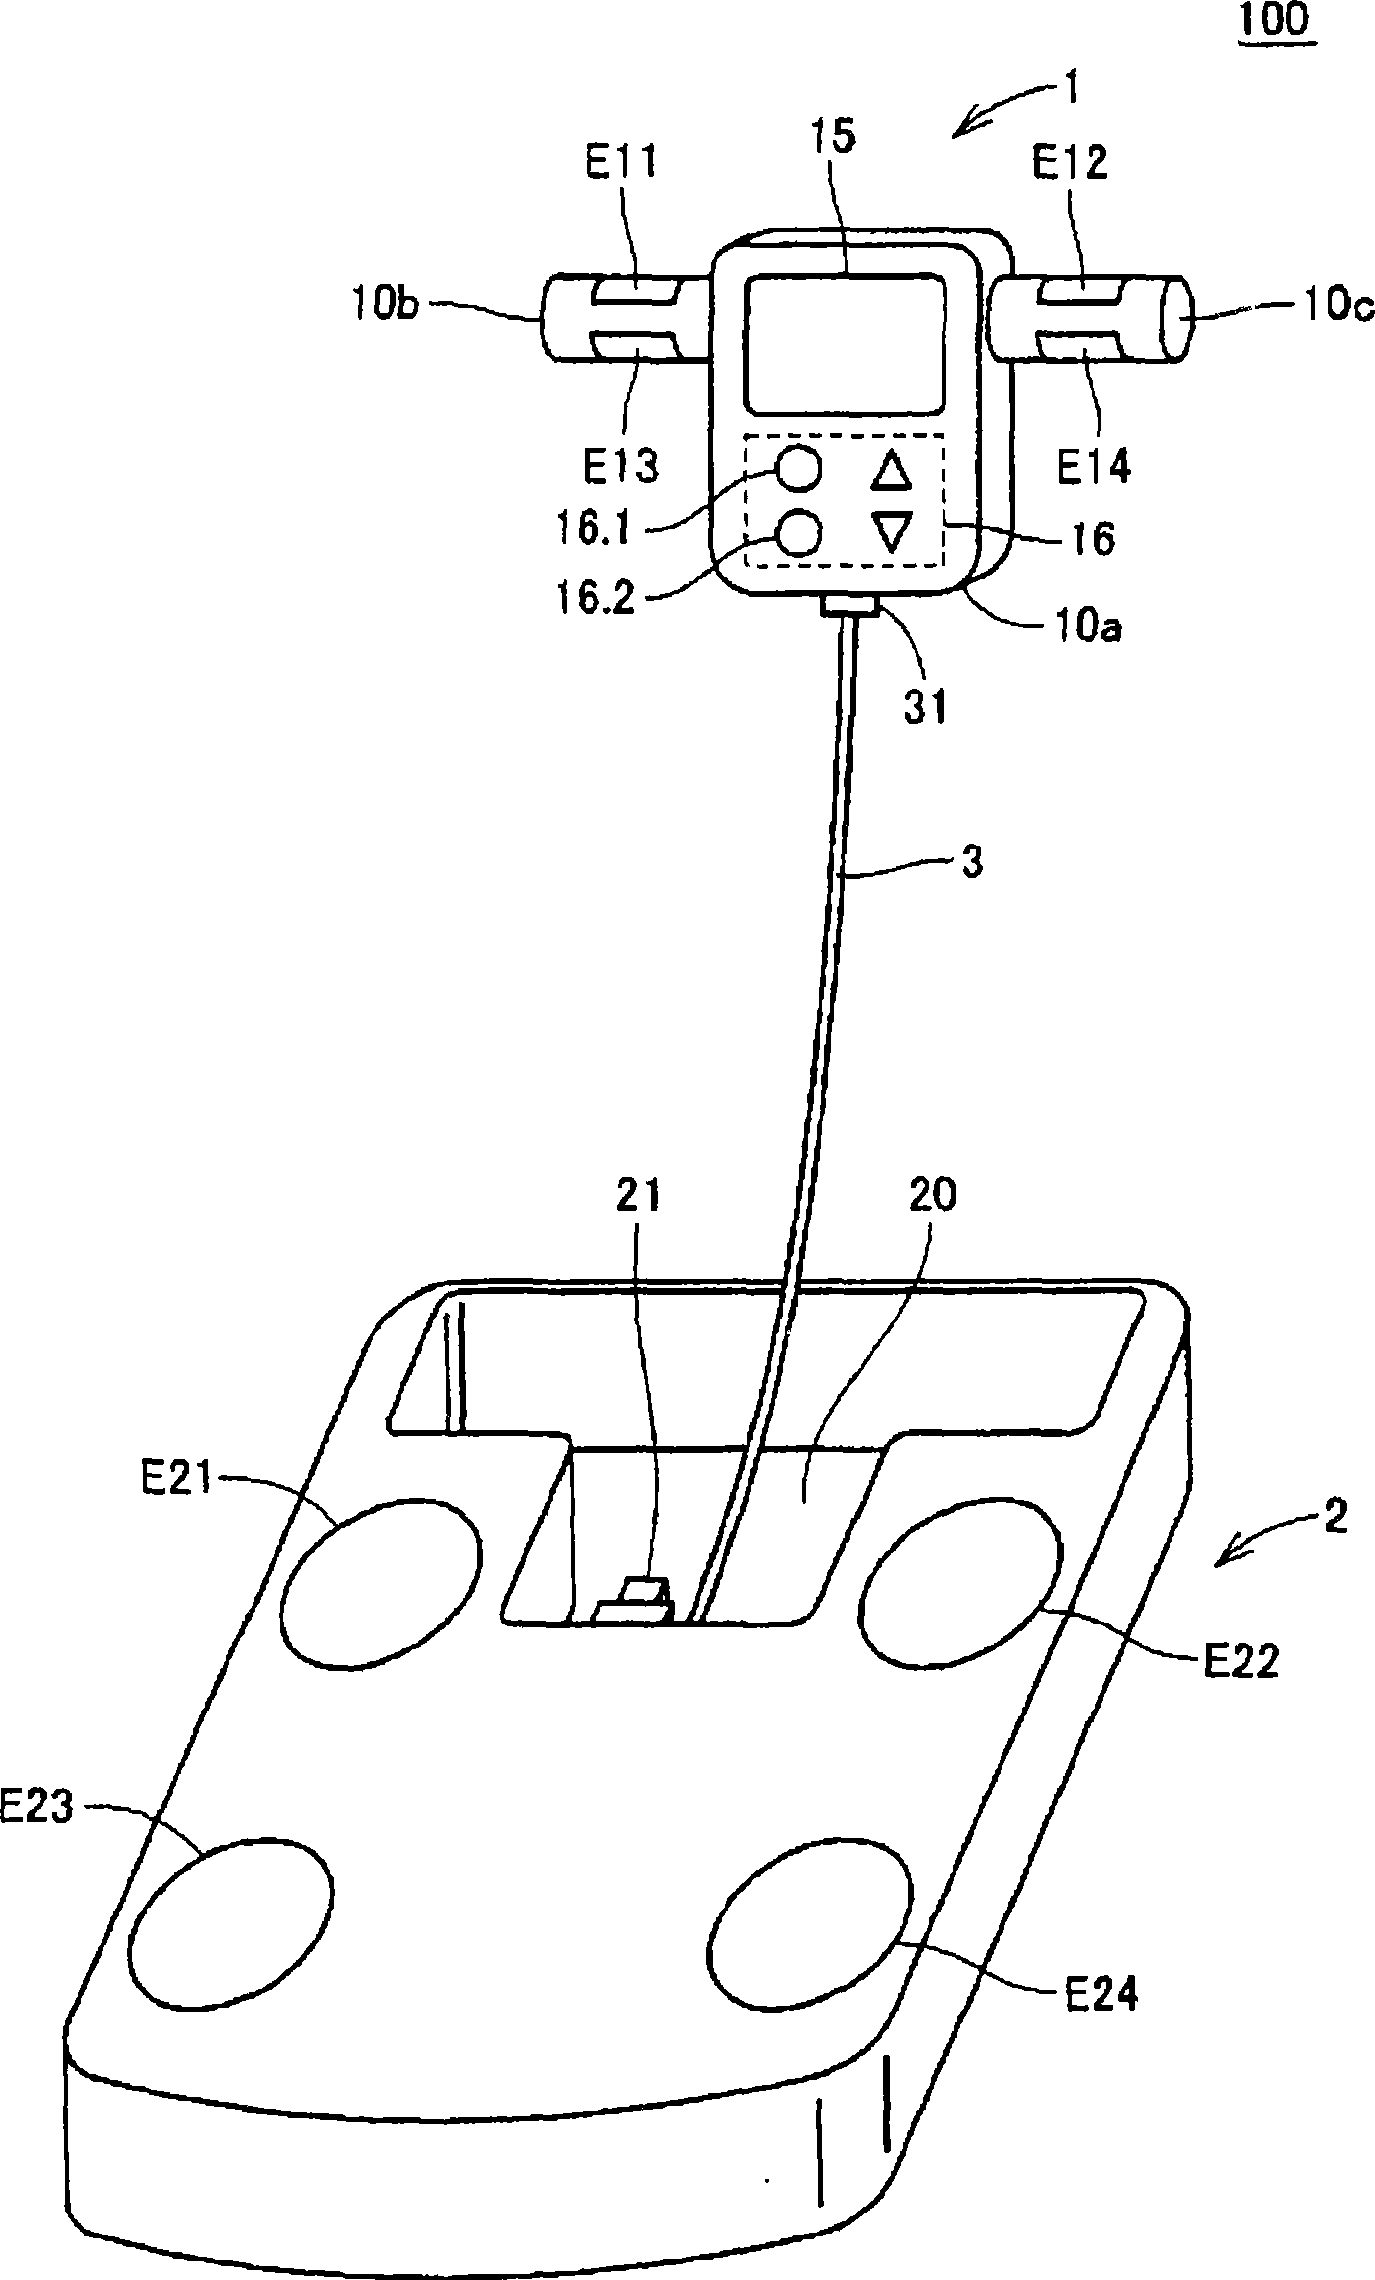 Body composition monitor capable of accurately measuring whole-body composition and achieving facilitated manipulation